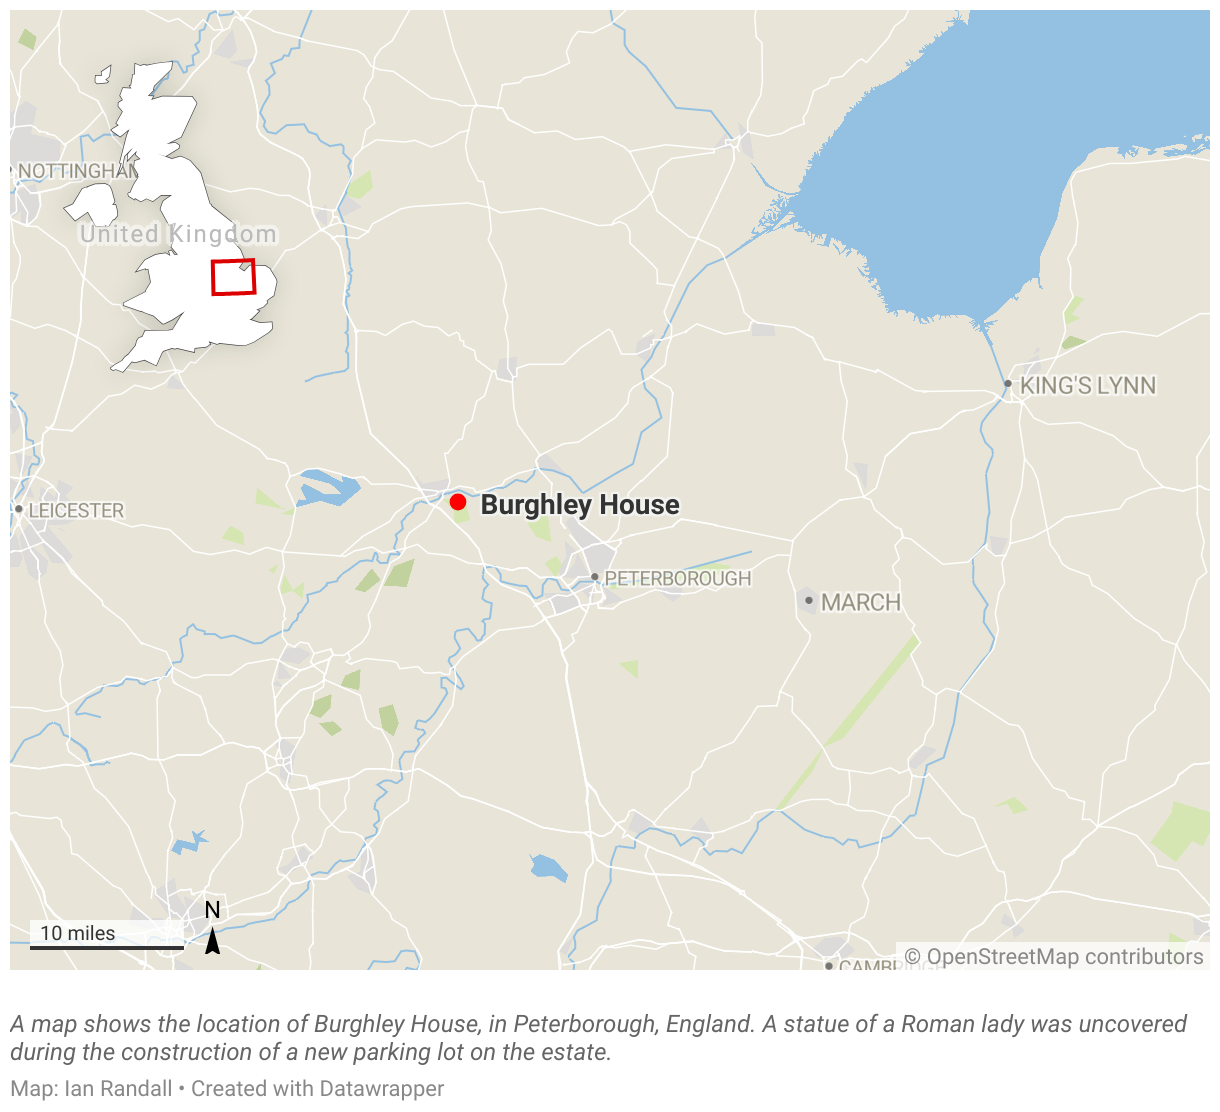 A map shows the location of Burghley House, in Peterborough, England.